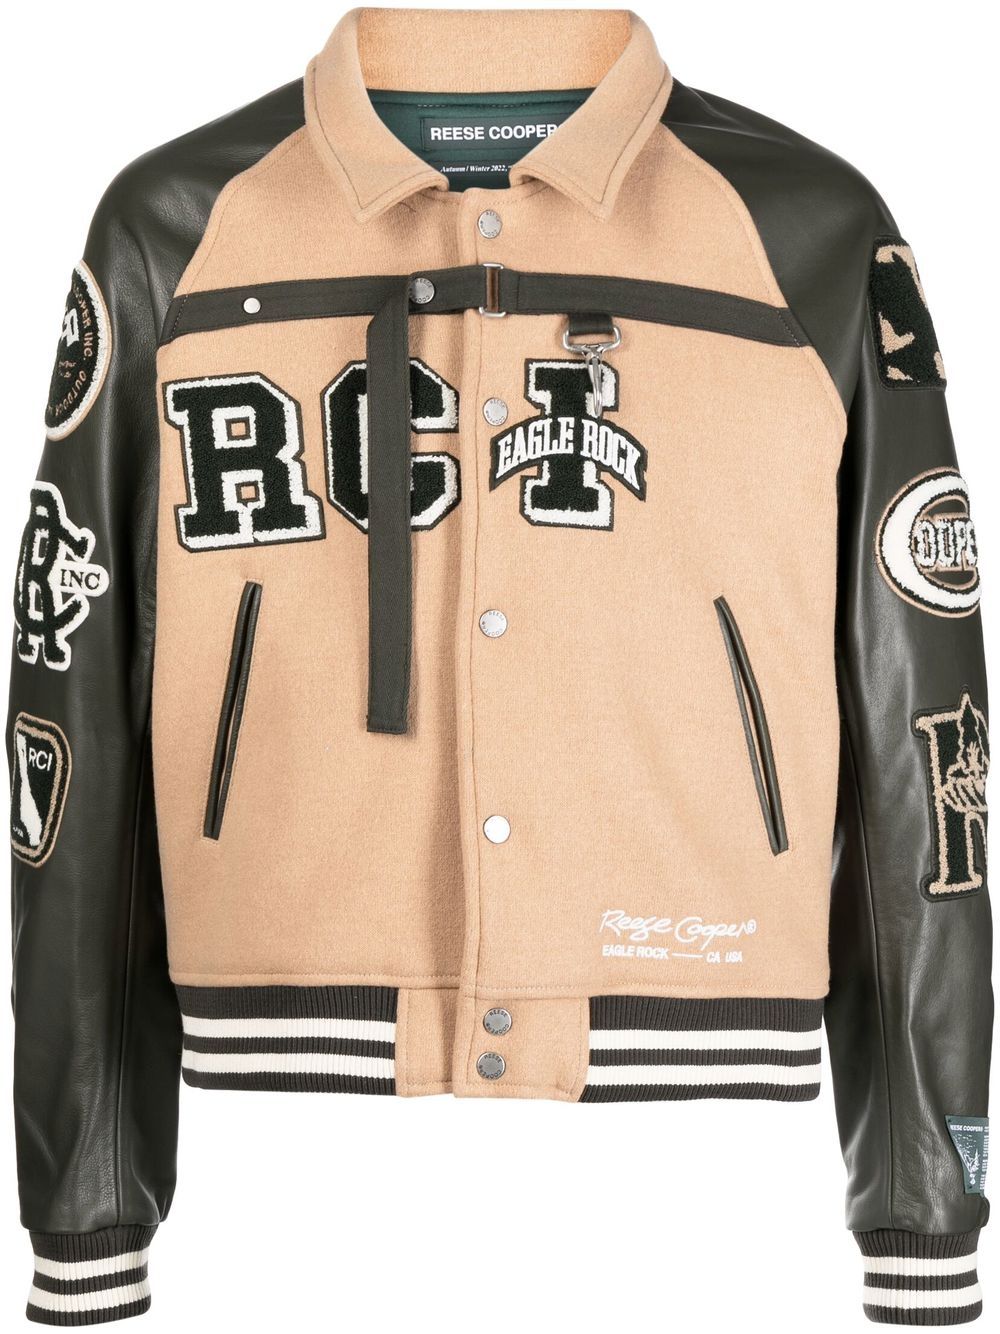 Reese Cooper embroidered-logo panelled jacket - Green von Reese Cooper